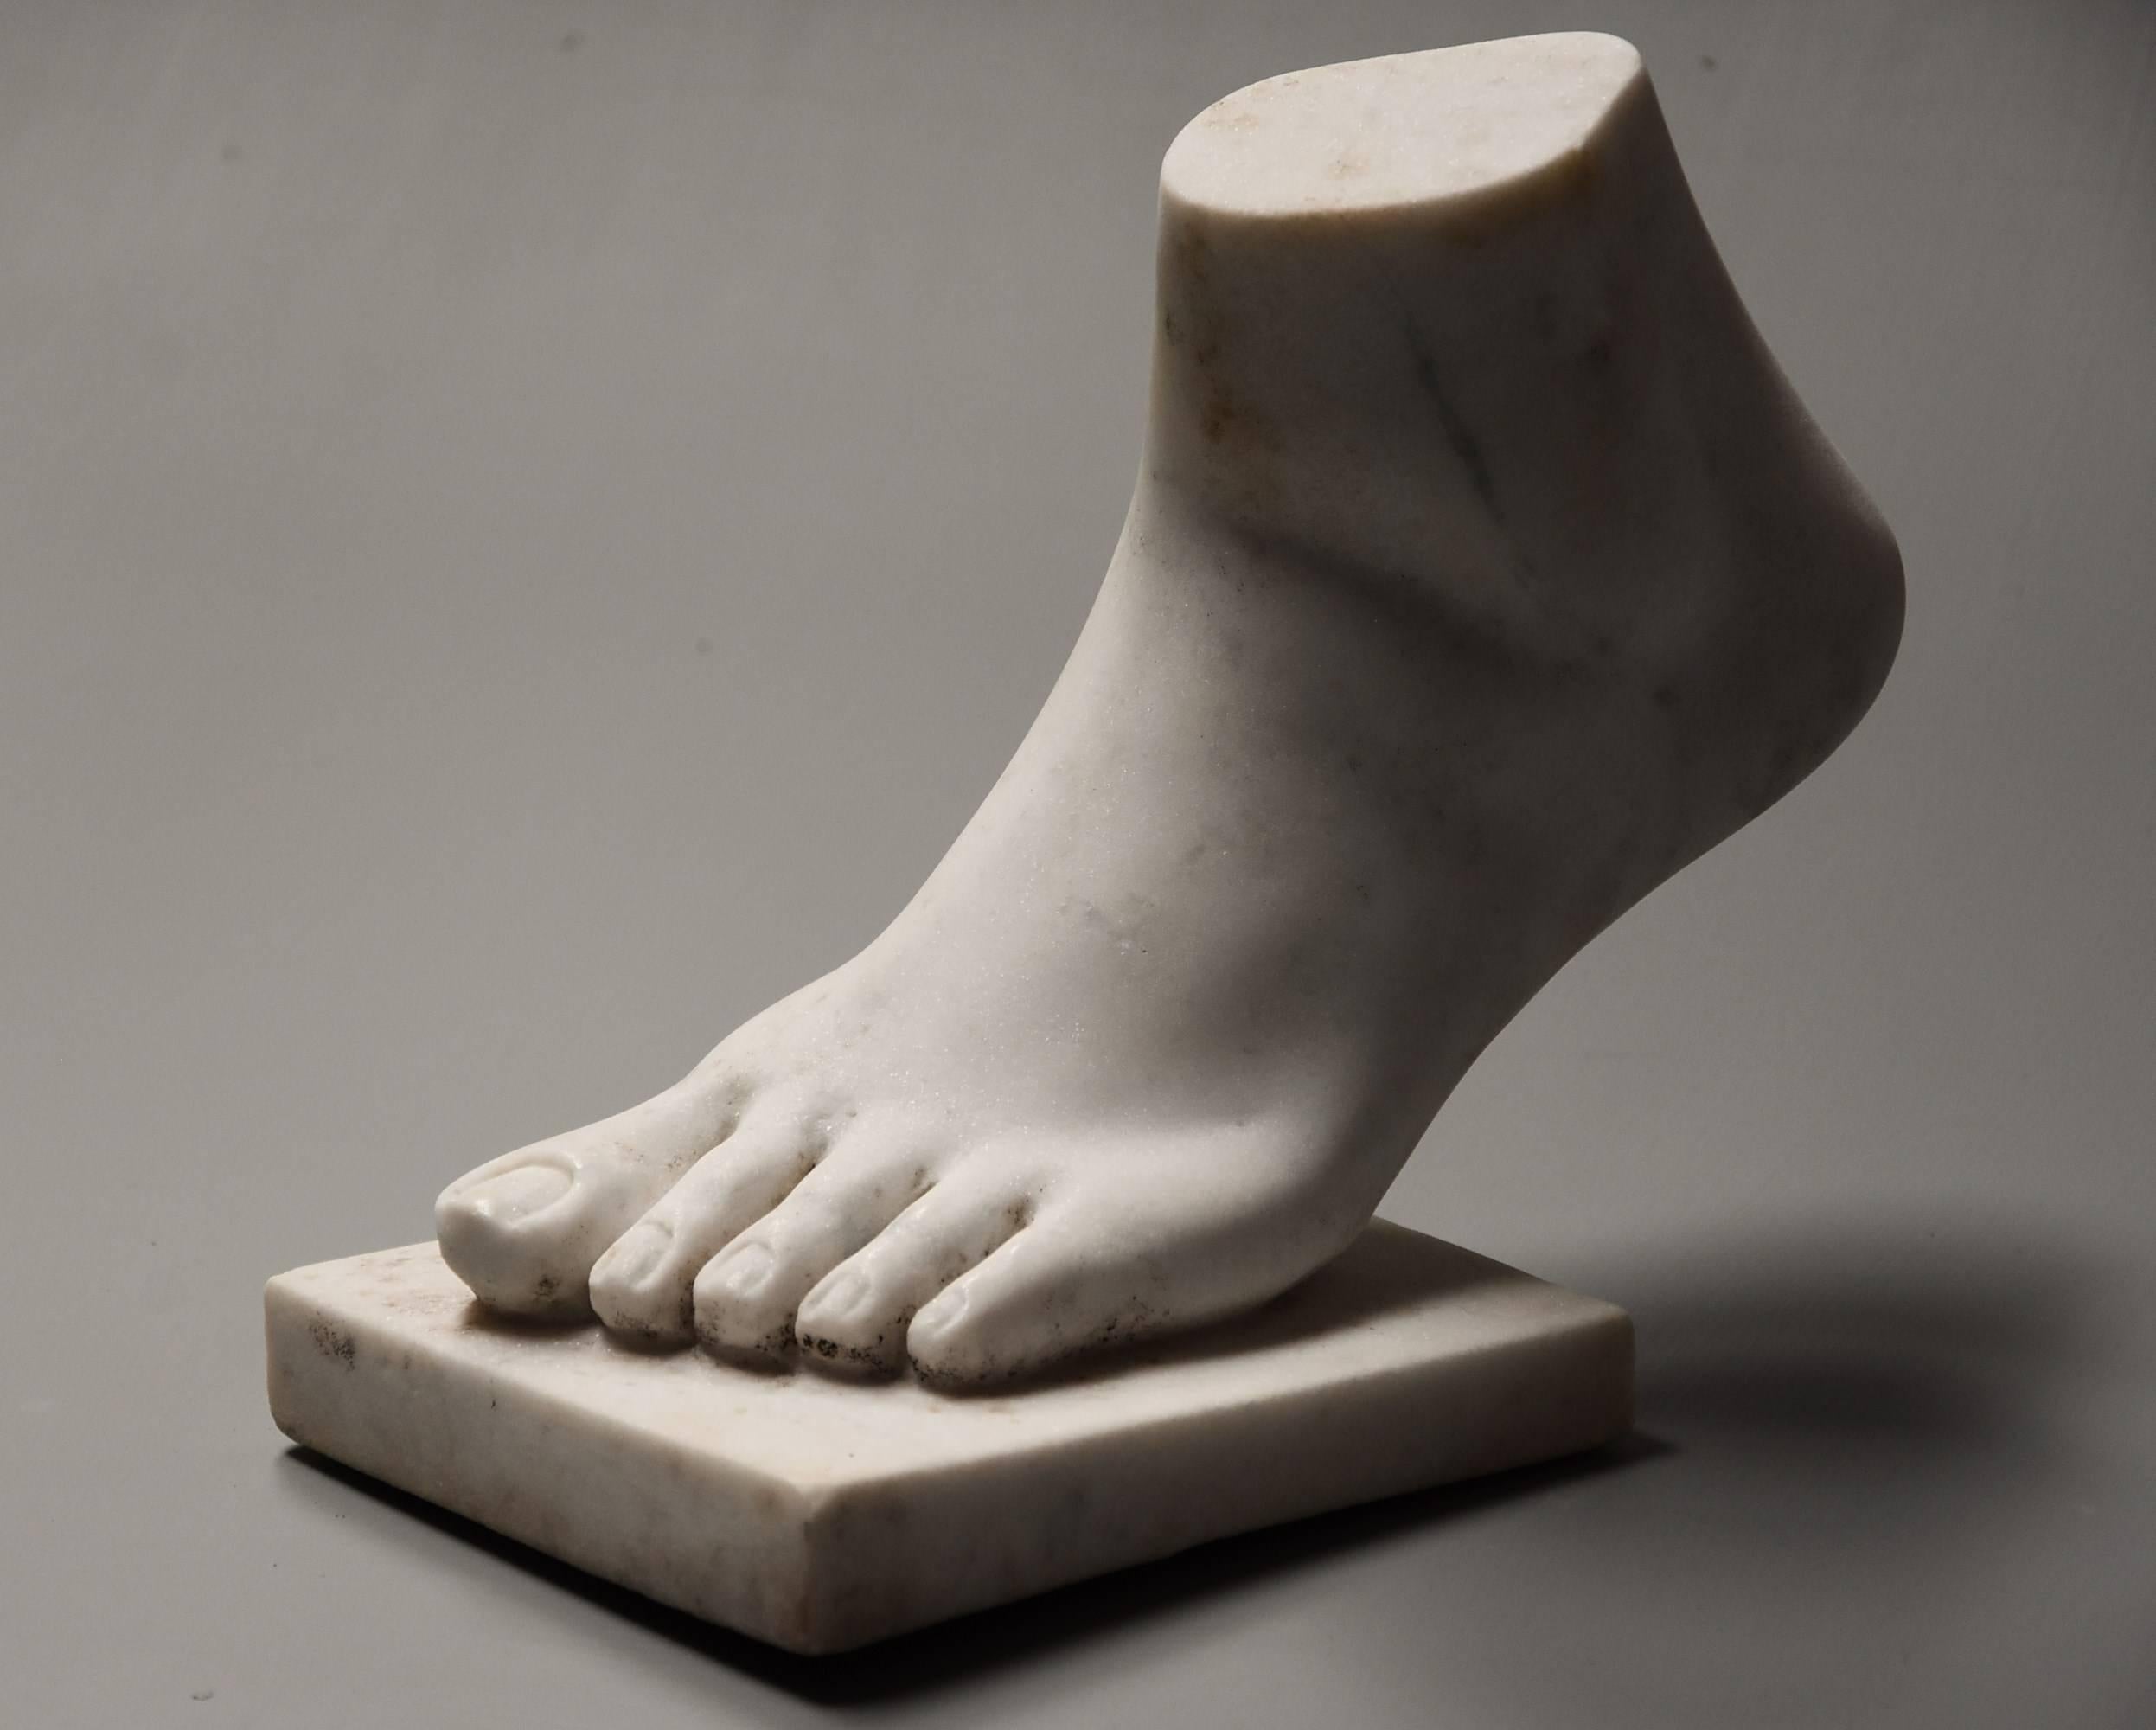 Italian Late 19th Century Grand Tour Style Marble Sculpture of a Foot, after the Antique